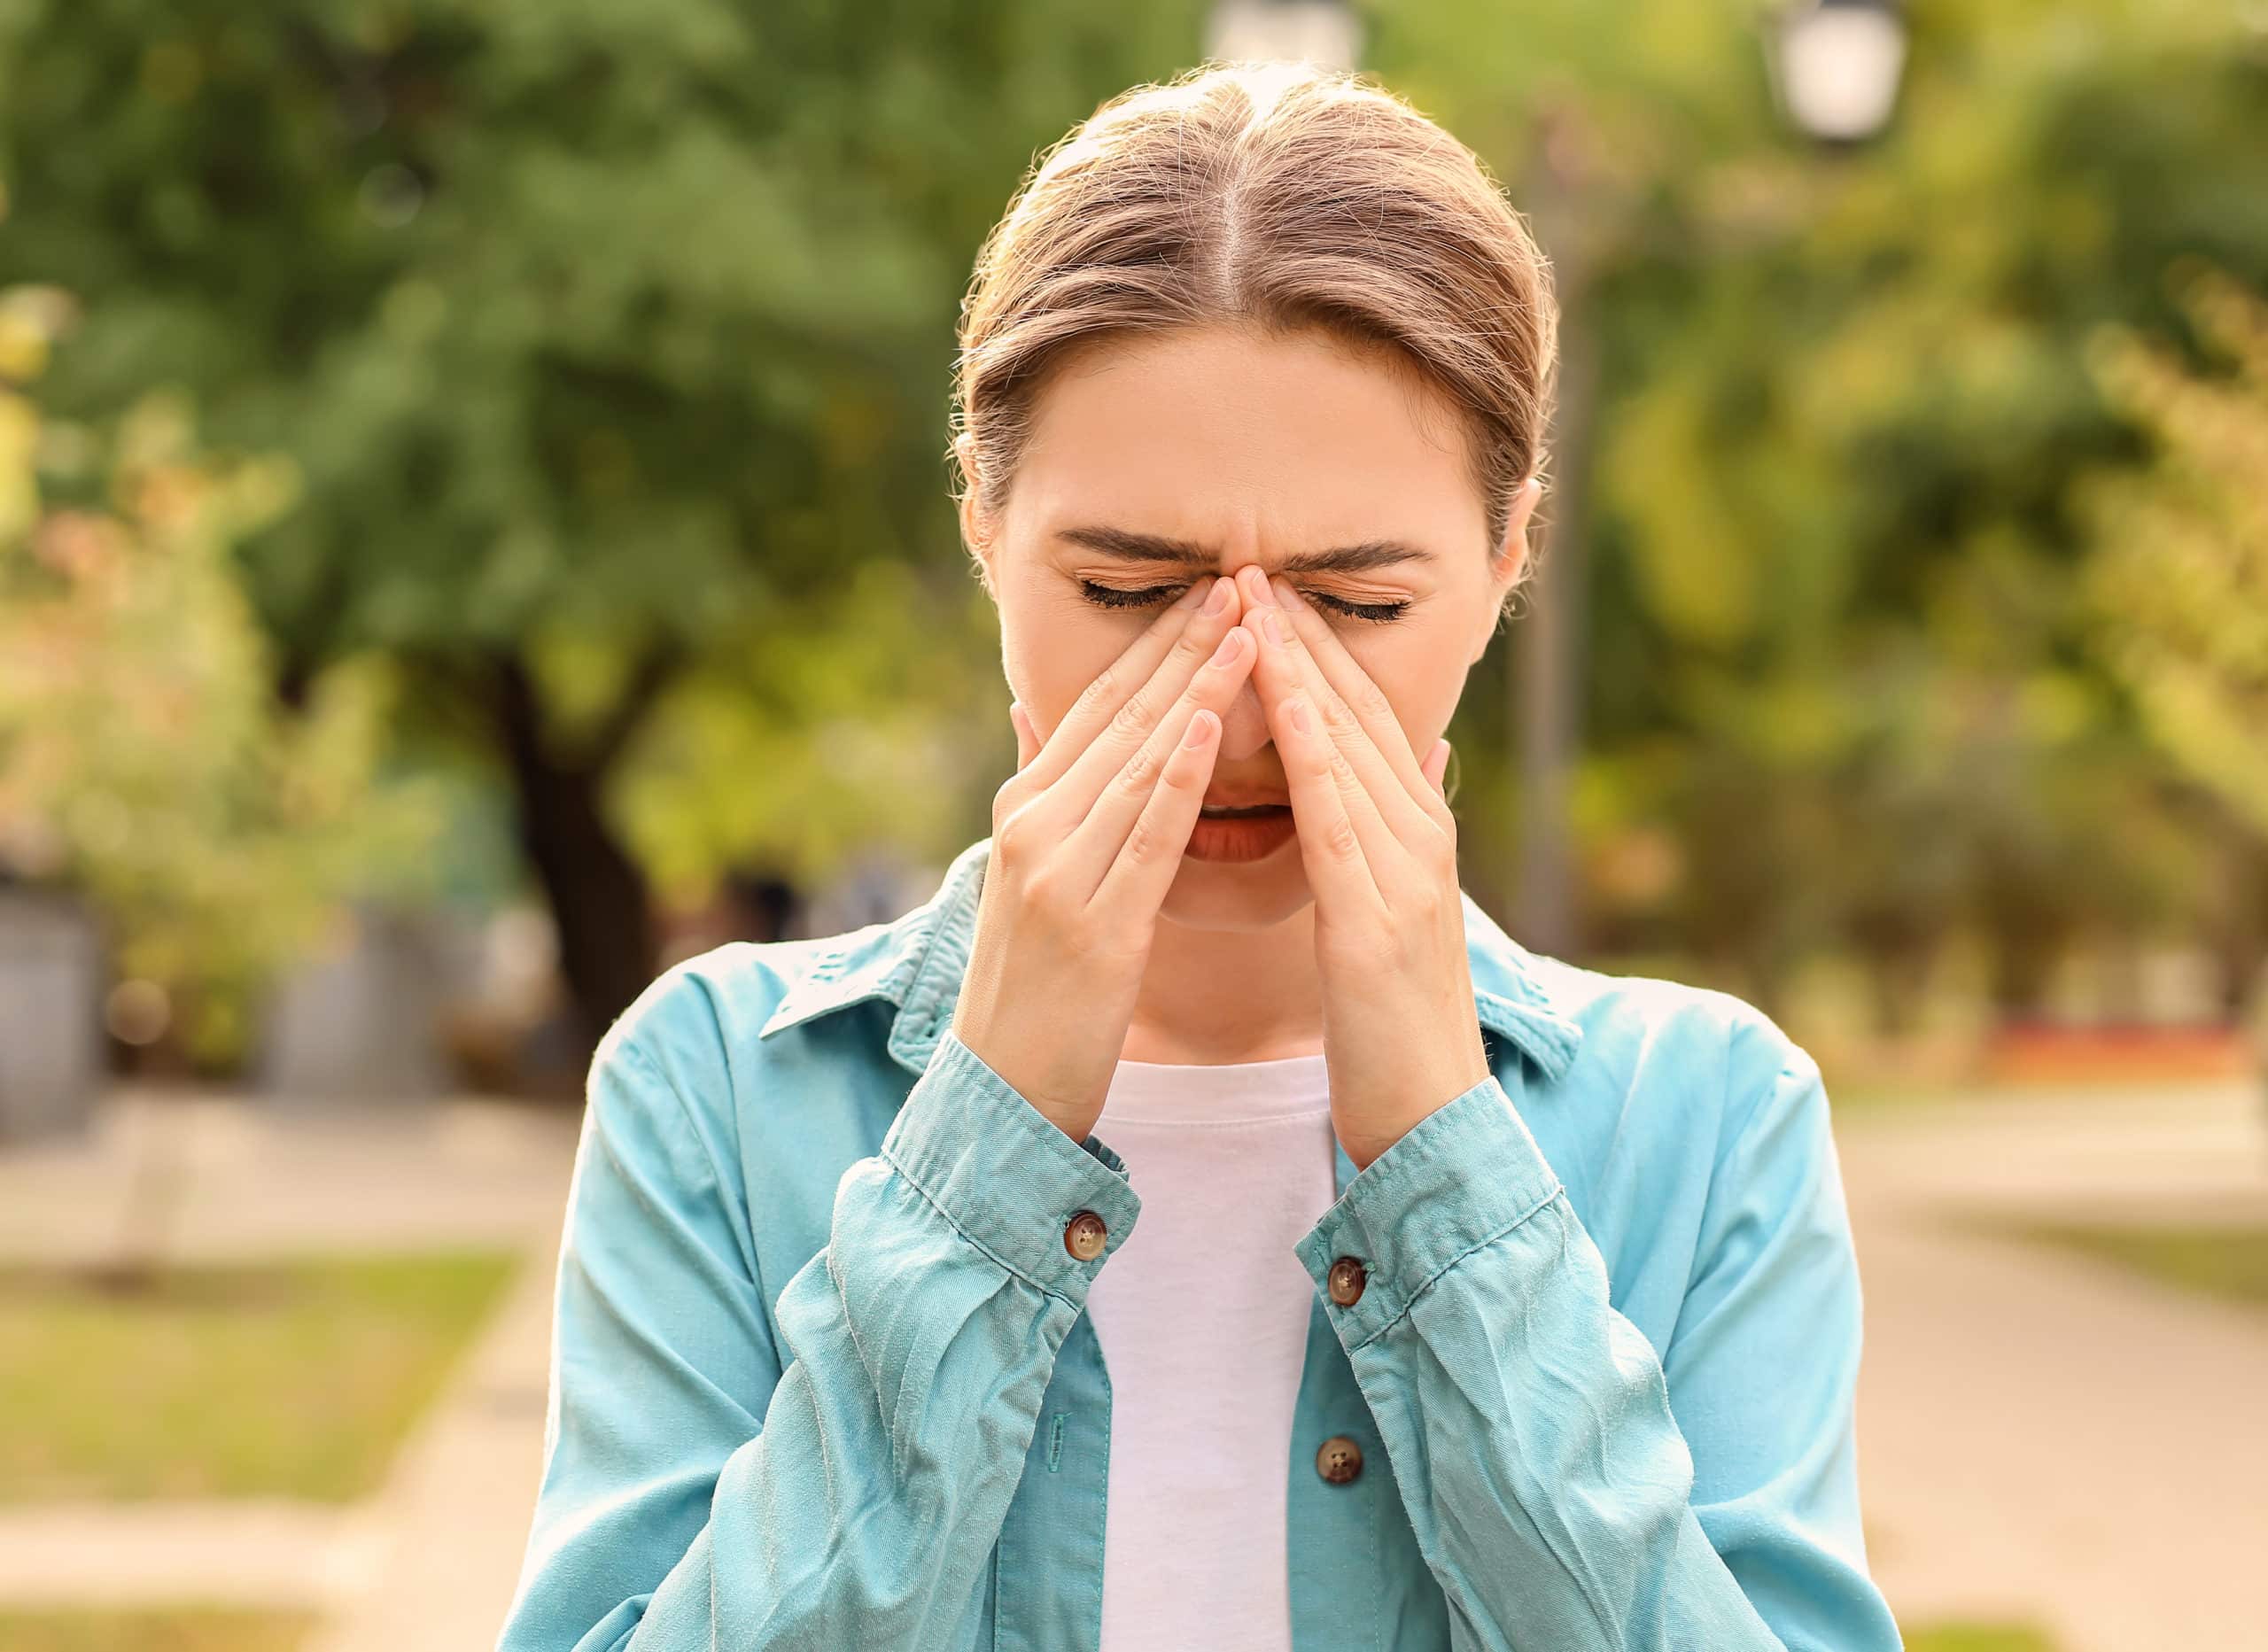 How To Tell The Difference Between Allergies And A Cold